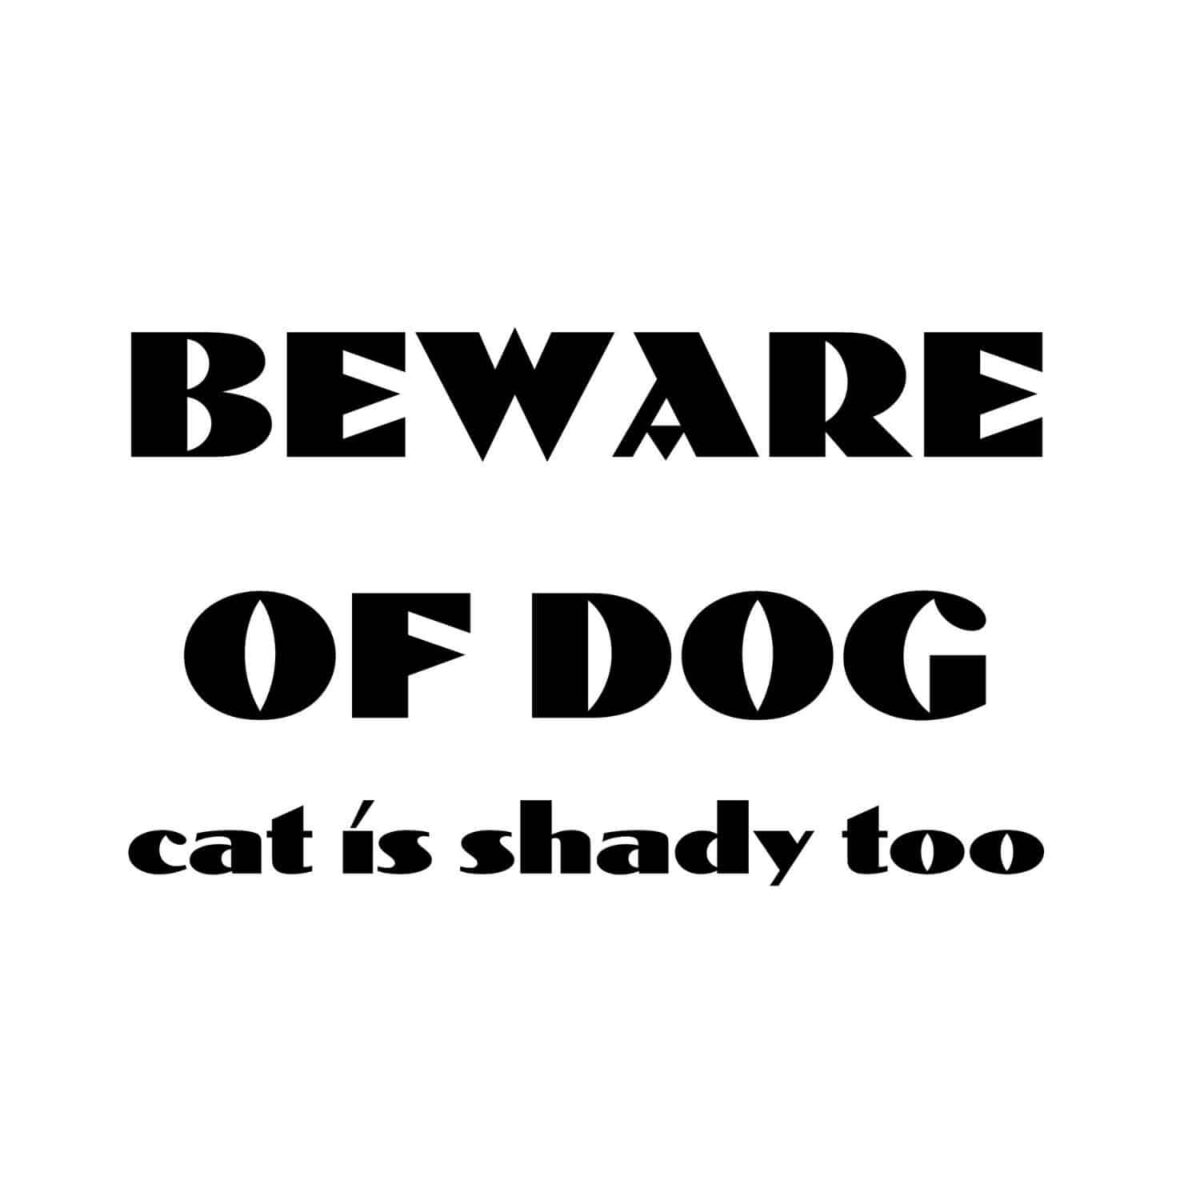 Beware Of Dog Cat Is Shady Too SVG, PNG, JPG, PDF Files